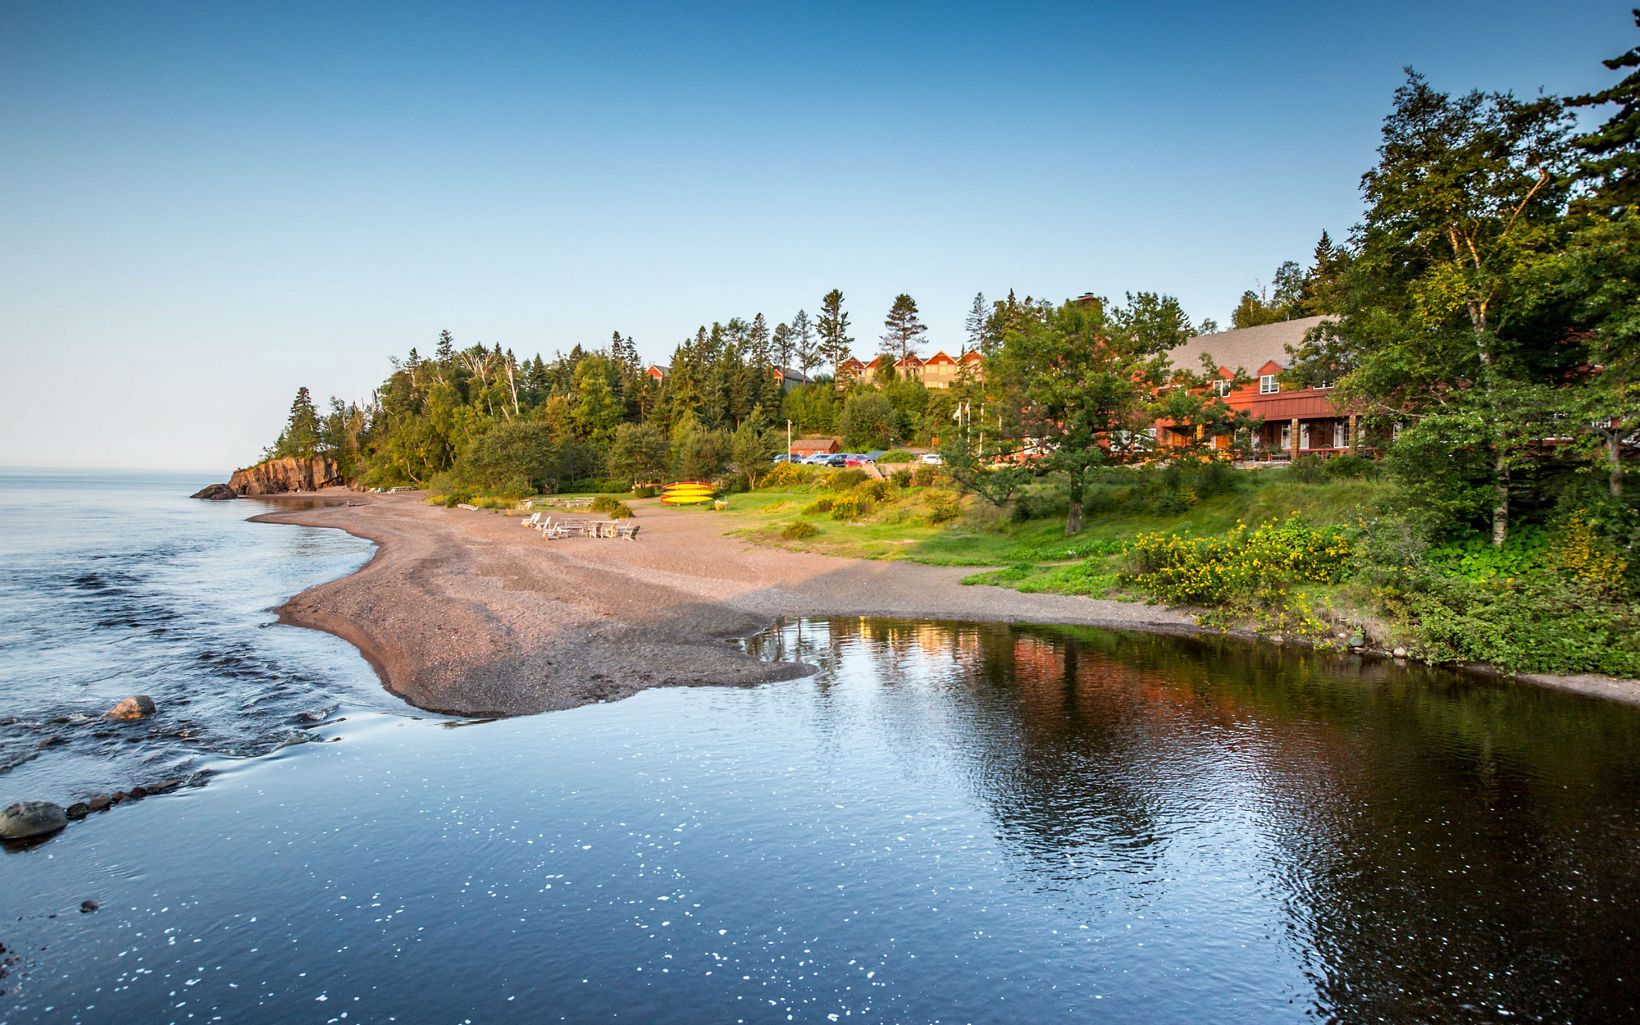 A lodge building is nestled amongst the green conifers along the shores of Lake Superior.